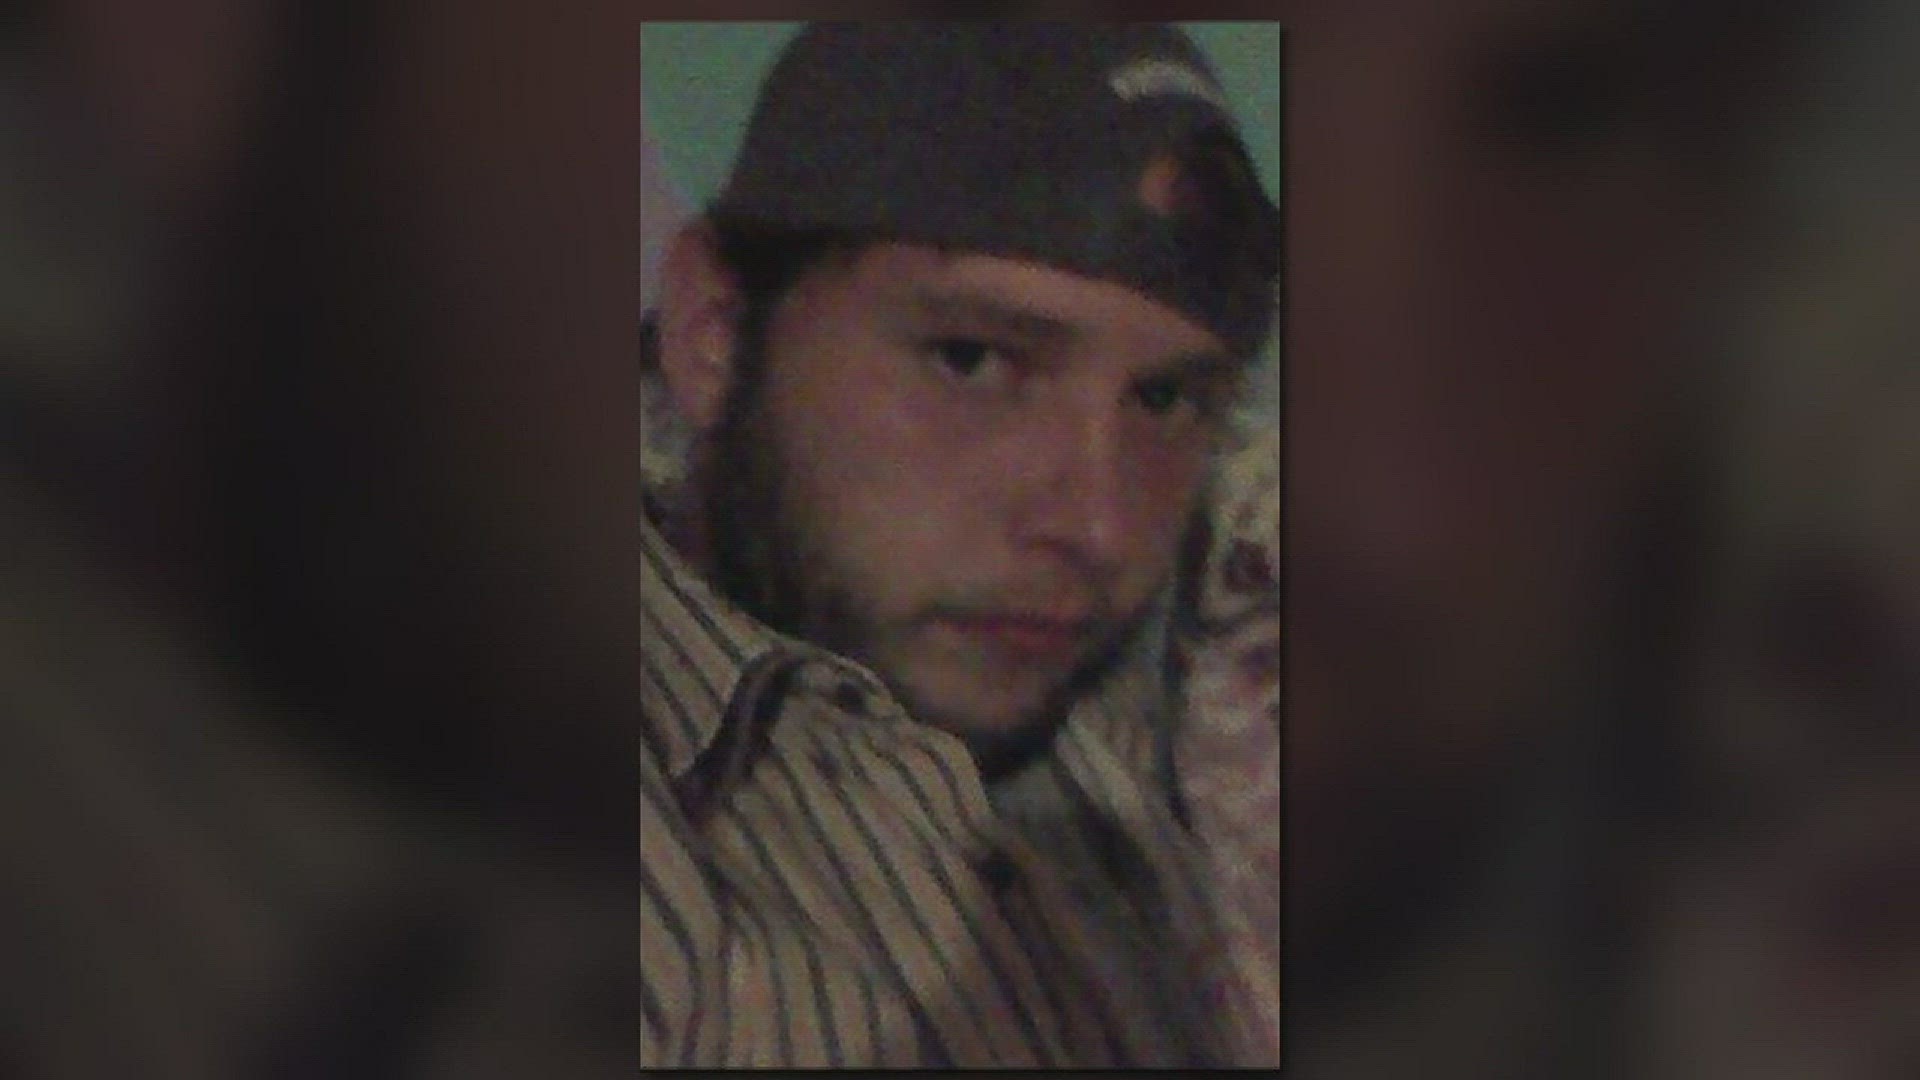 Friends of 25 year old Brandon Robertson are remembering the Nederland man who has been identified as the victim of a homicide. Robertson's badly burned body was found in may in Fred.